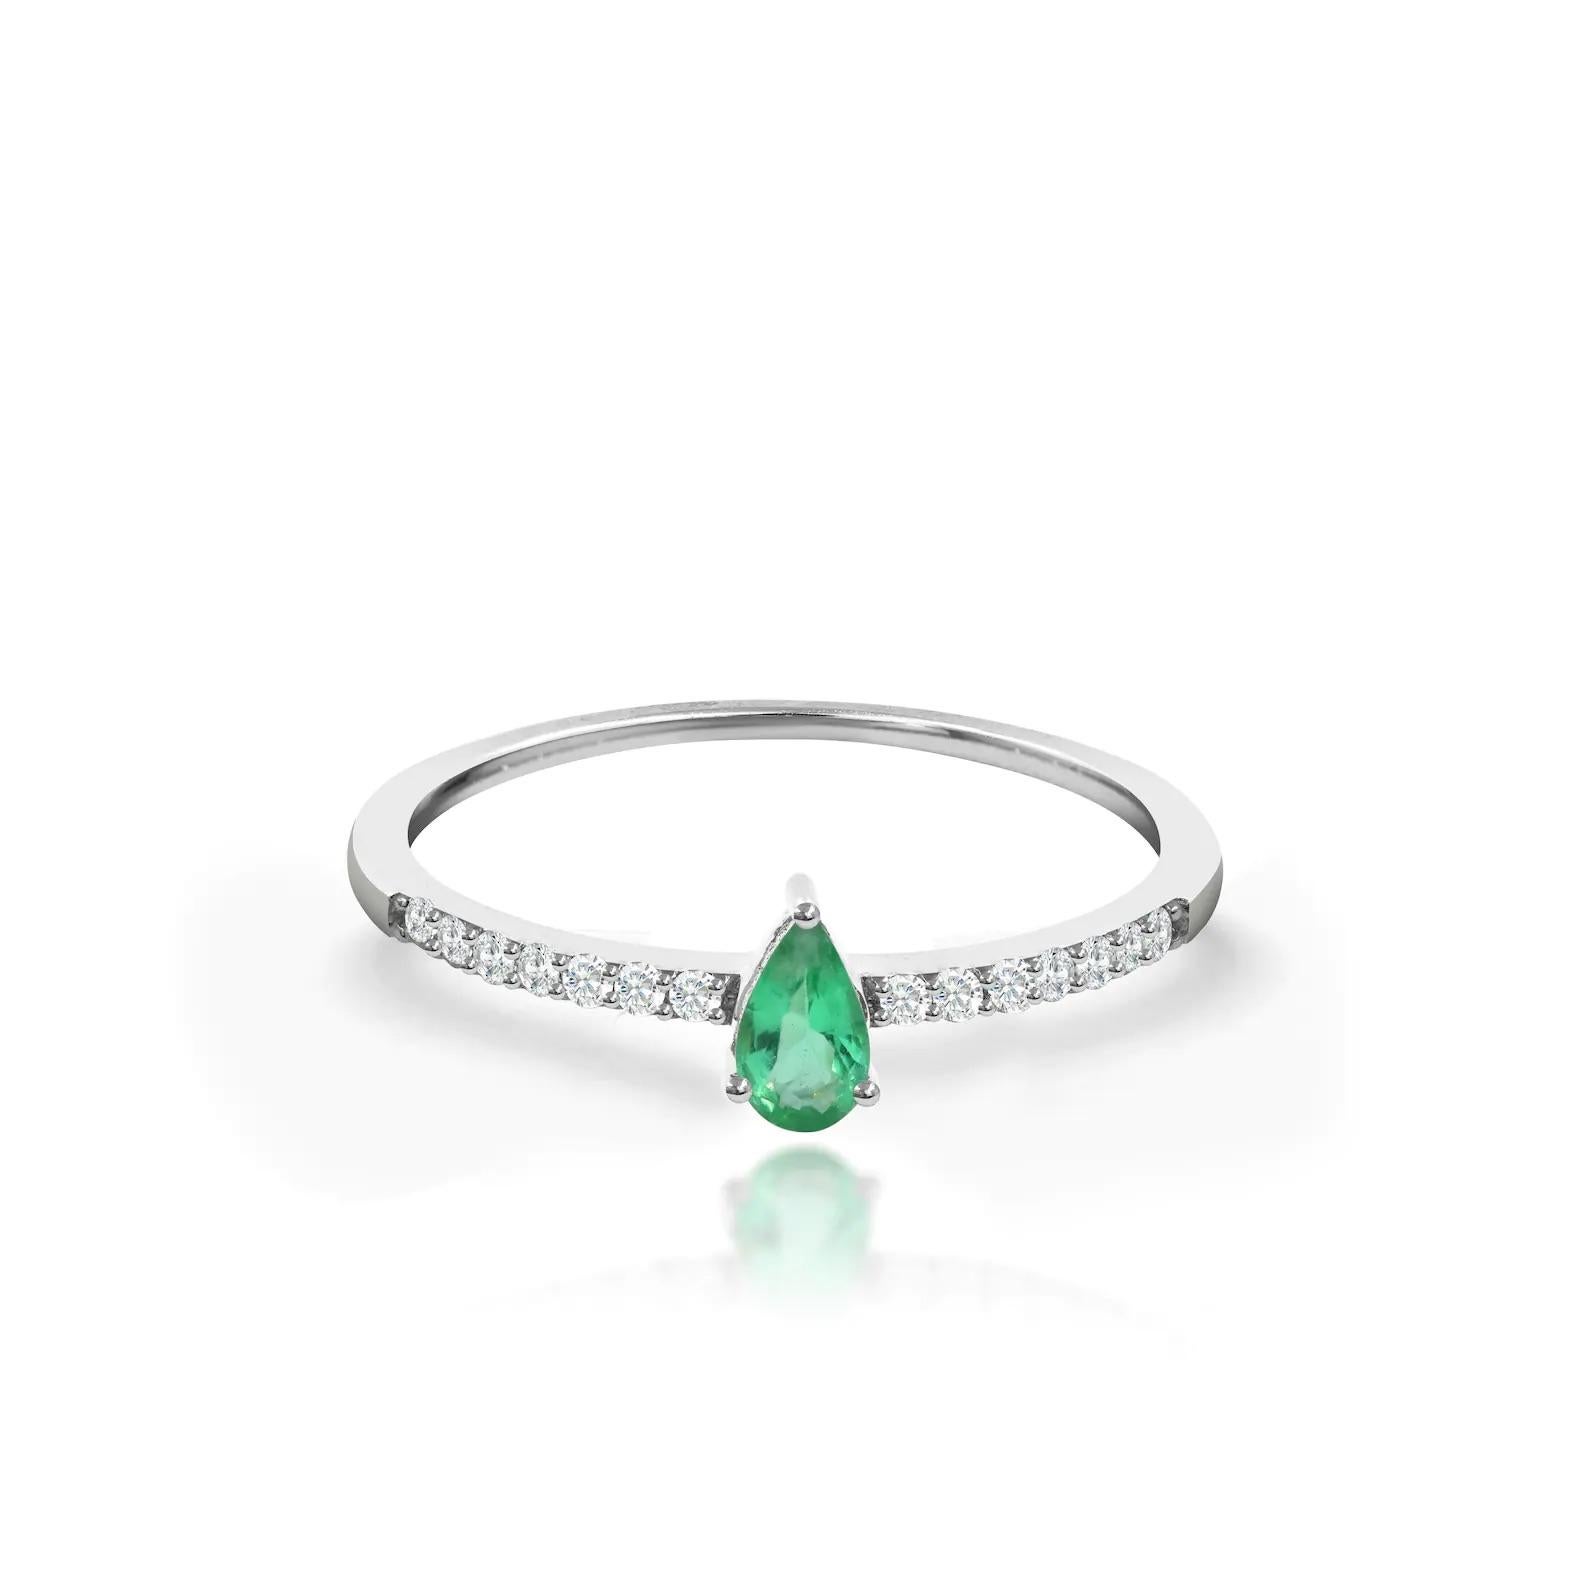 A lightweight and gorgeous emerald ring with sparkly diamonds all over is a beautiful engagement ring. Minimalist yet statement ring is made in Solid gold, Genuine emerald, and diamonds of 0.31 carat. Shop this beautiful piece now. 

